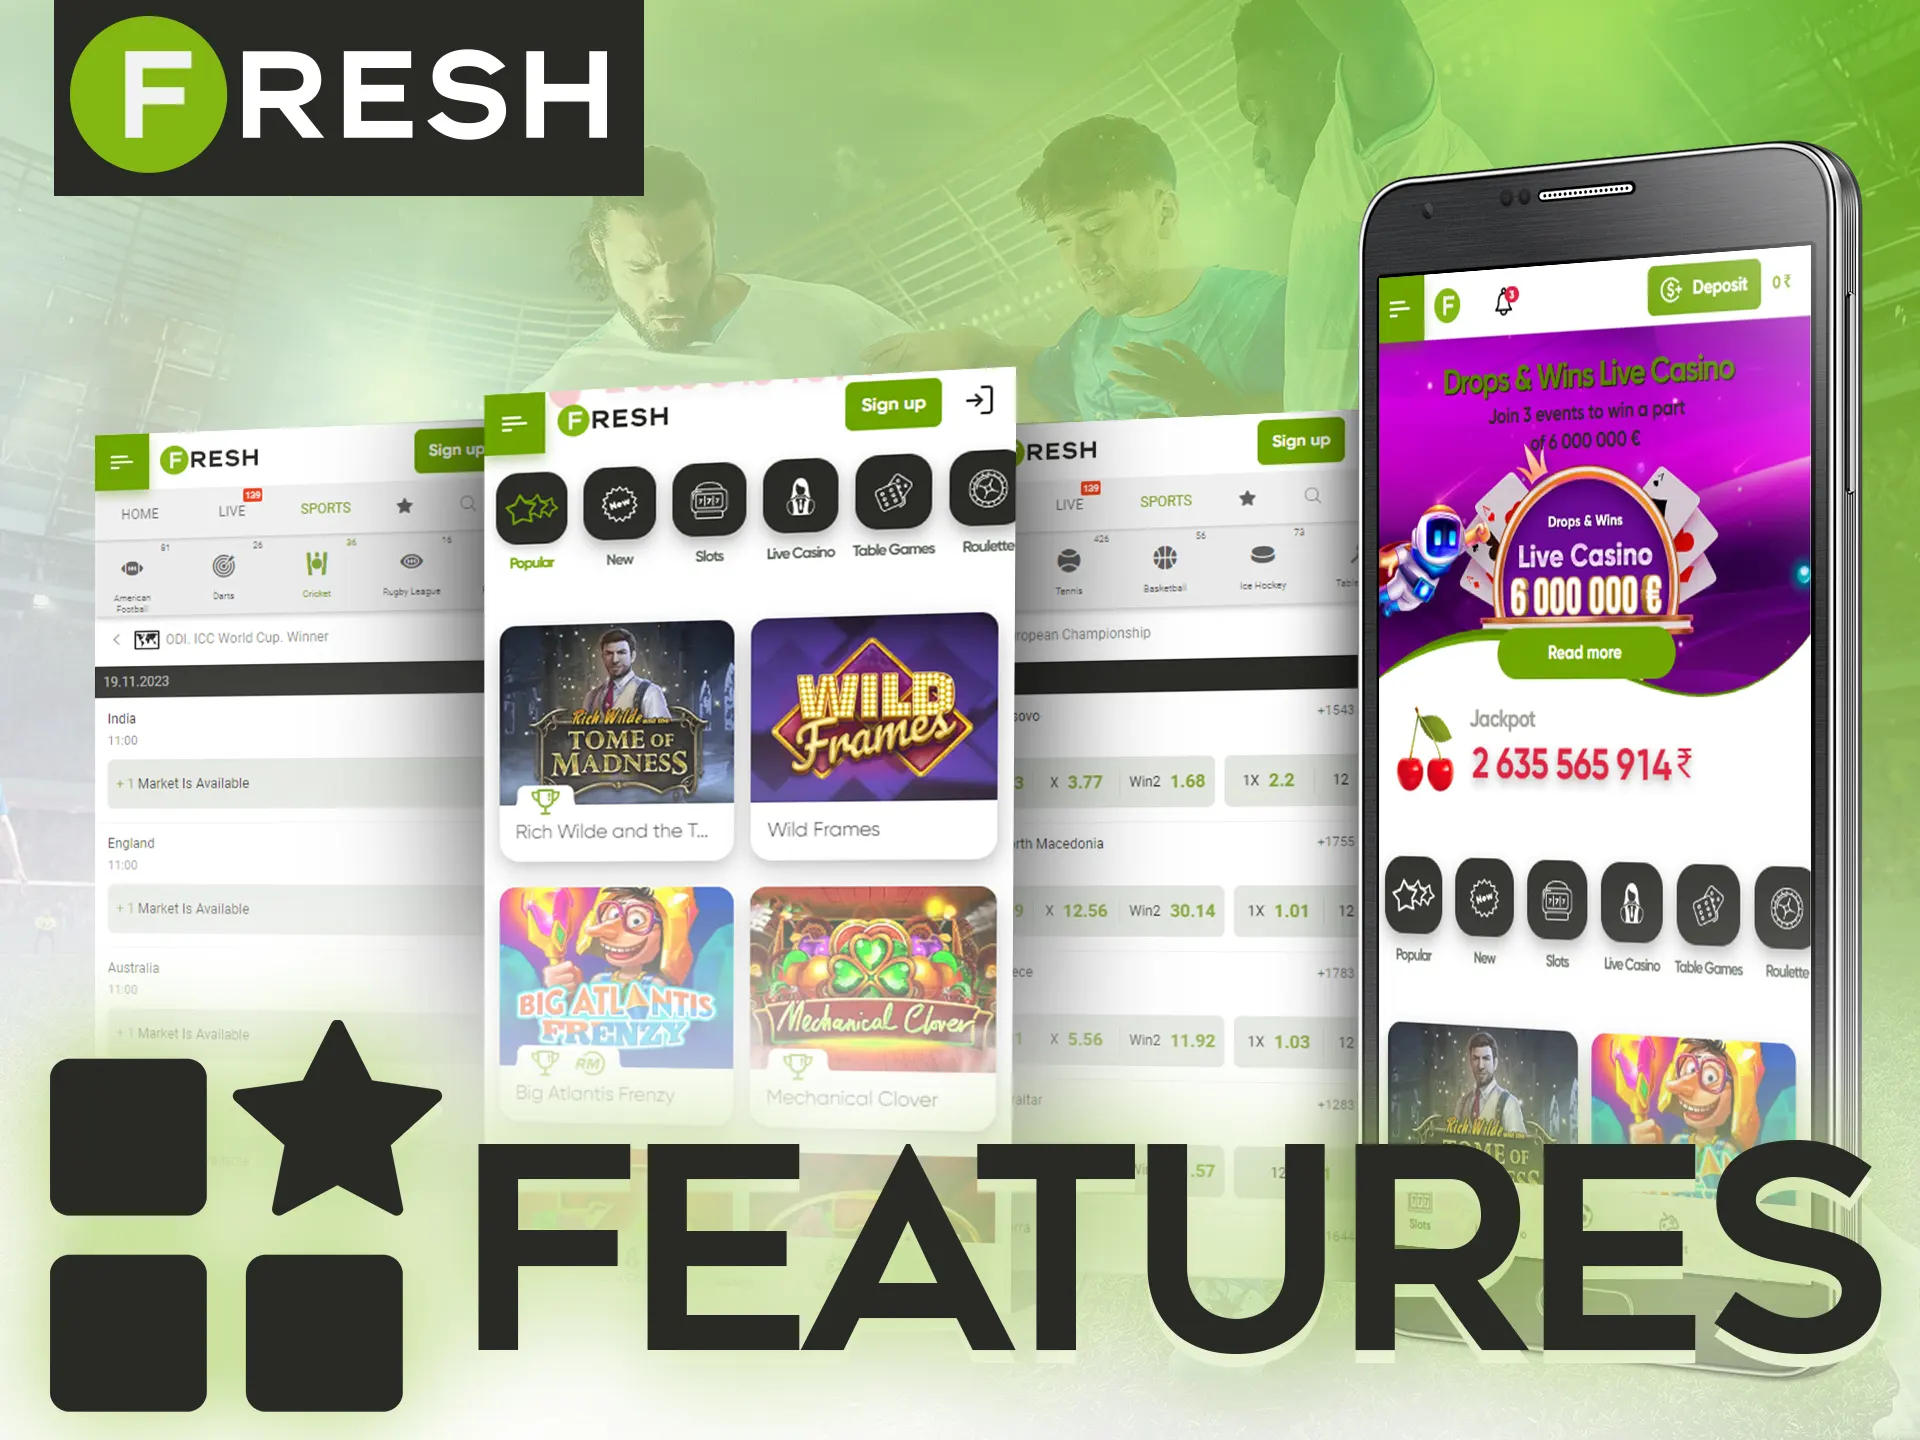 Learn more about the Fresh Casino app features.